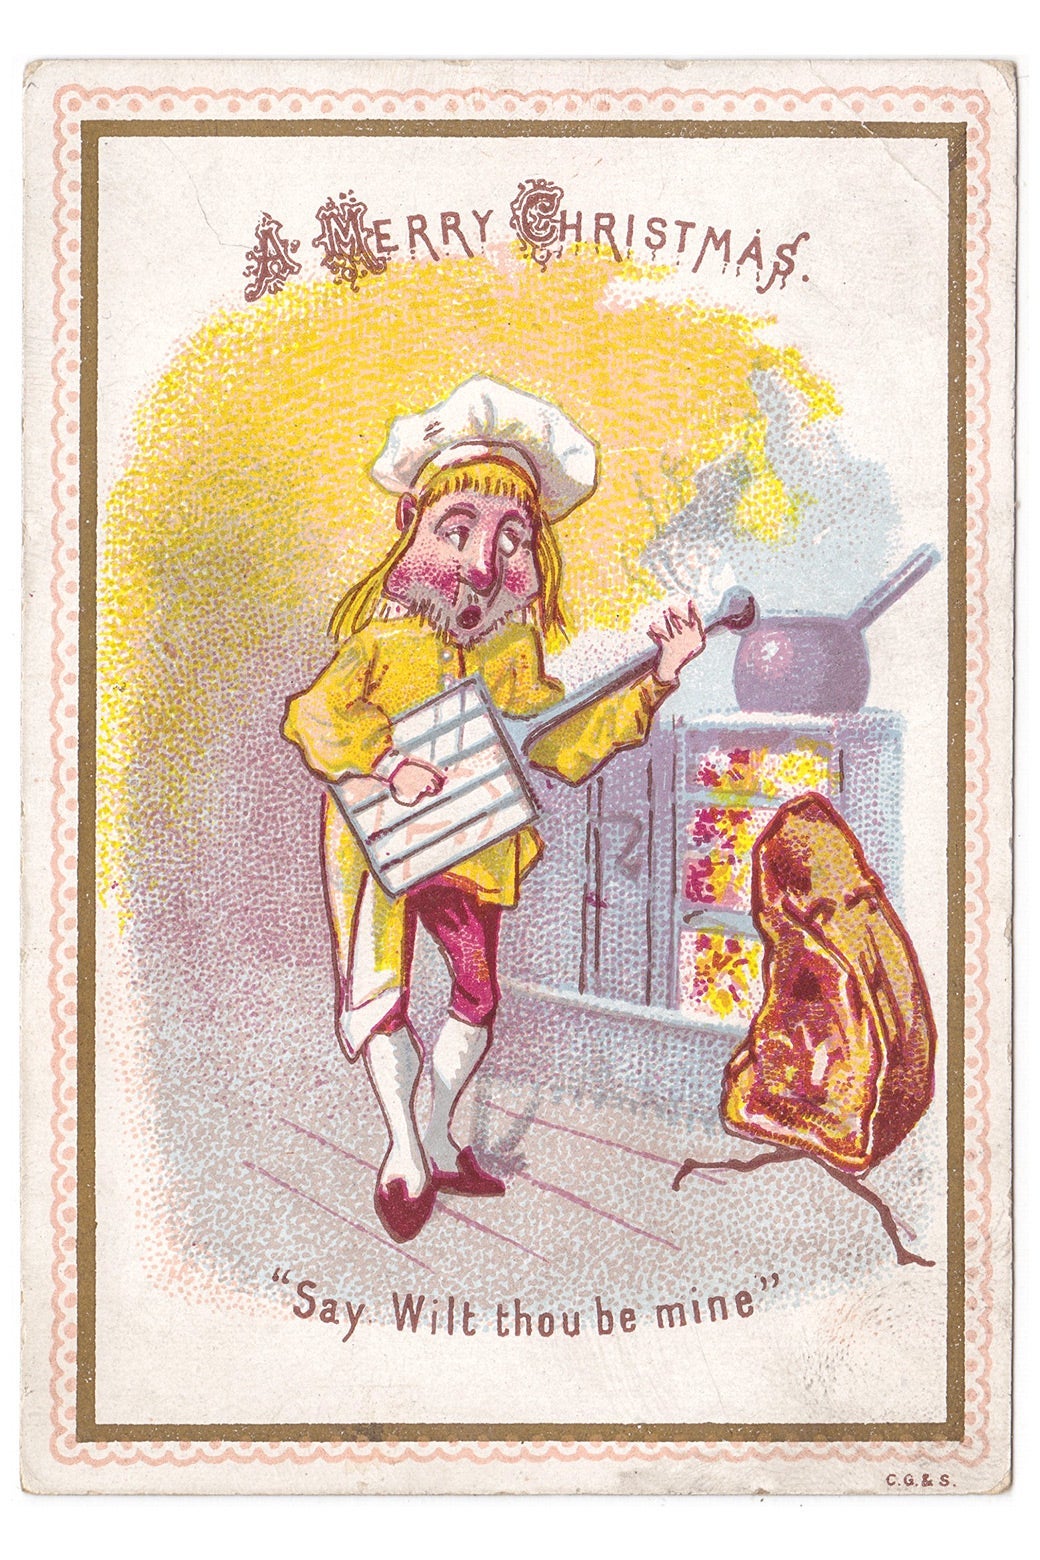 Victorian Christmas cards humor: a history of the Goodall company.